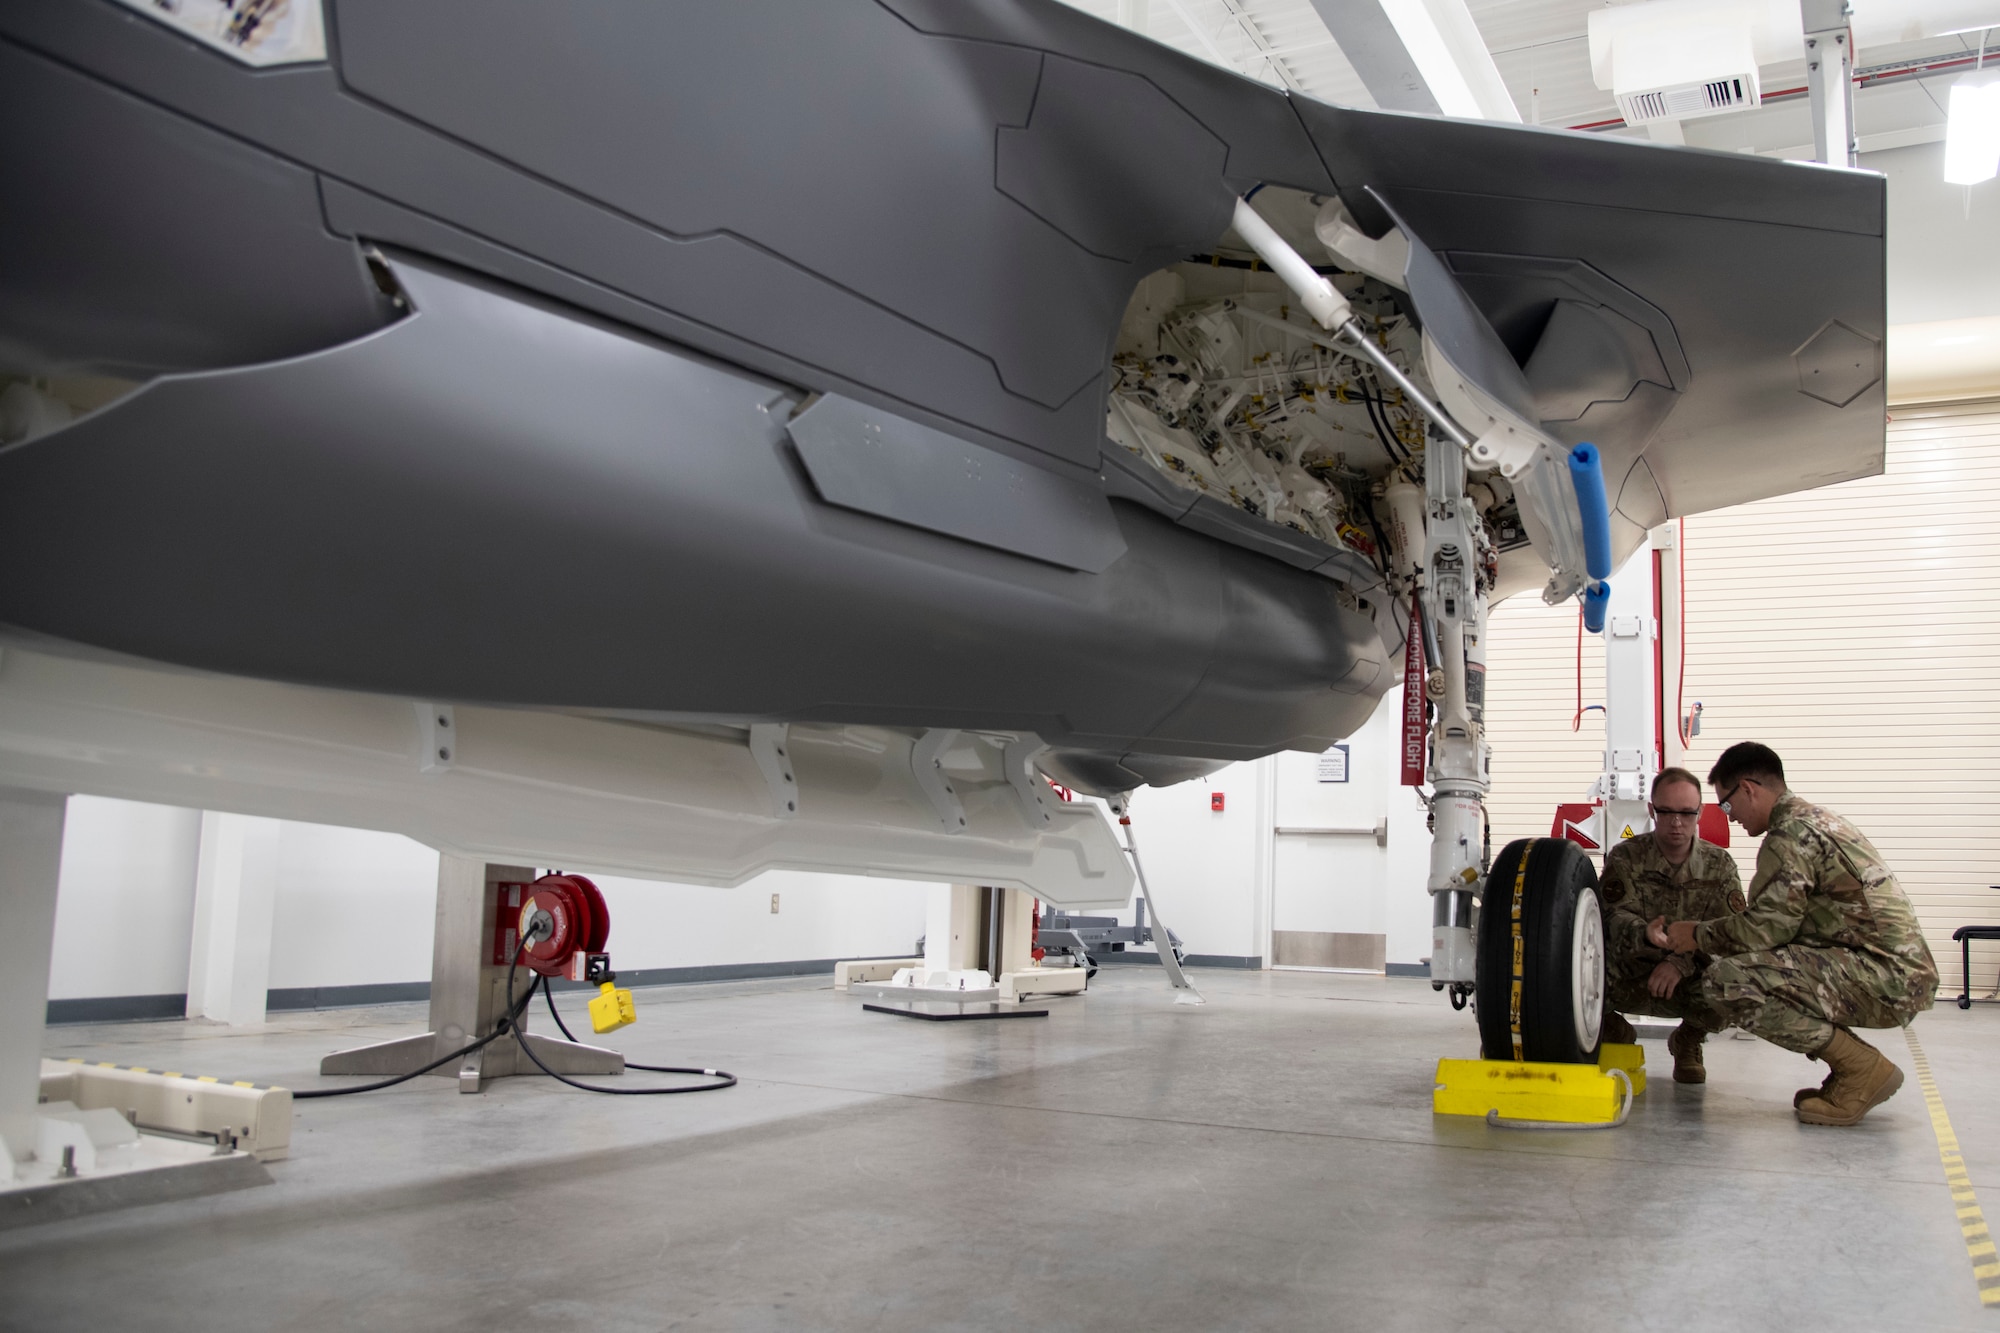 The F-35 ATC is the enterprise’s sole source of maintenance training, developing maintainers for three U.S. branches of service and 10 participating countries.